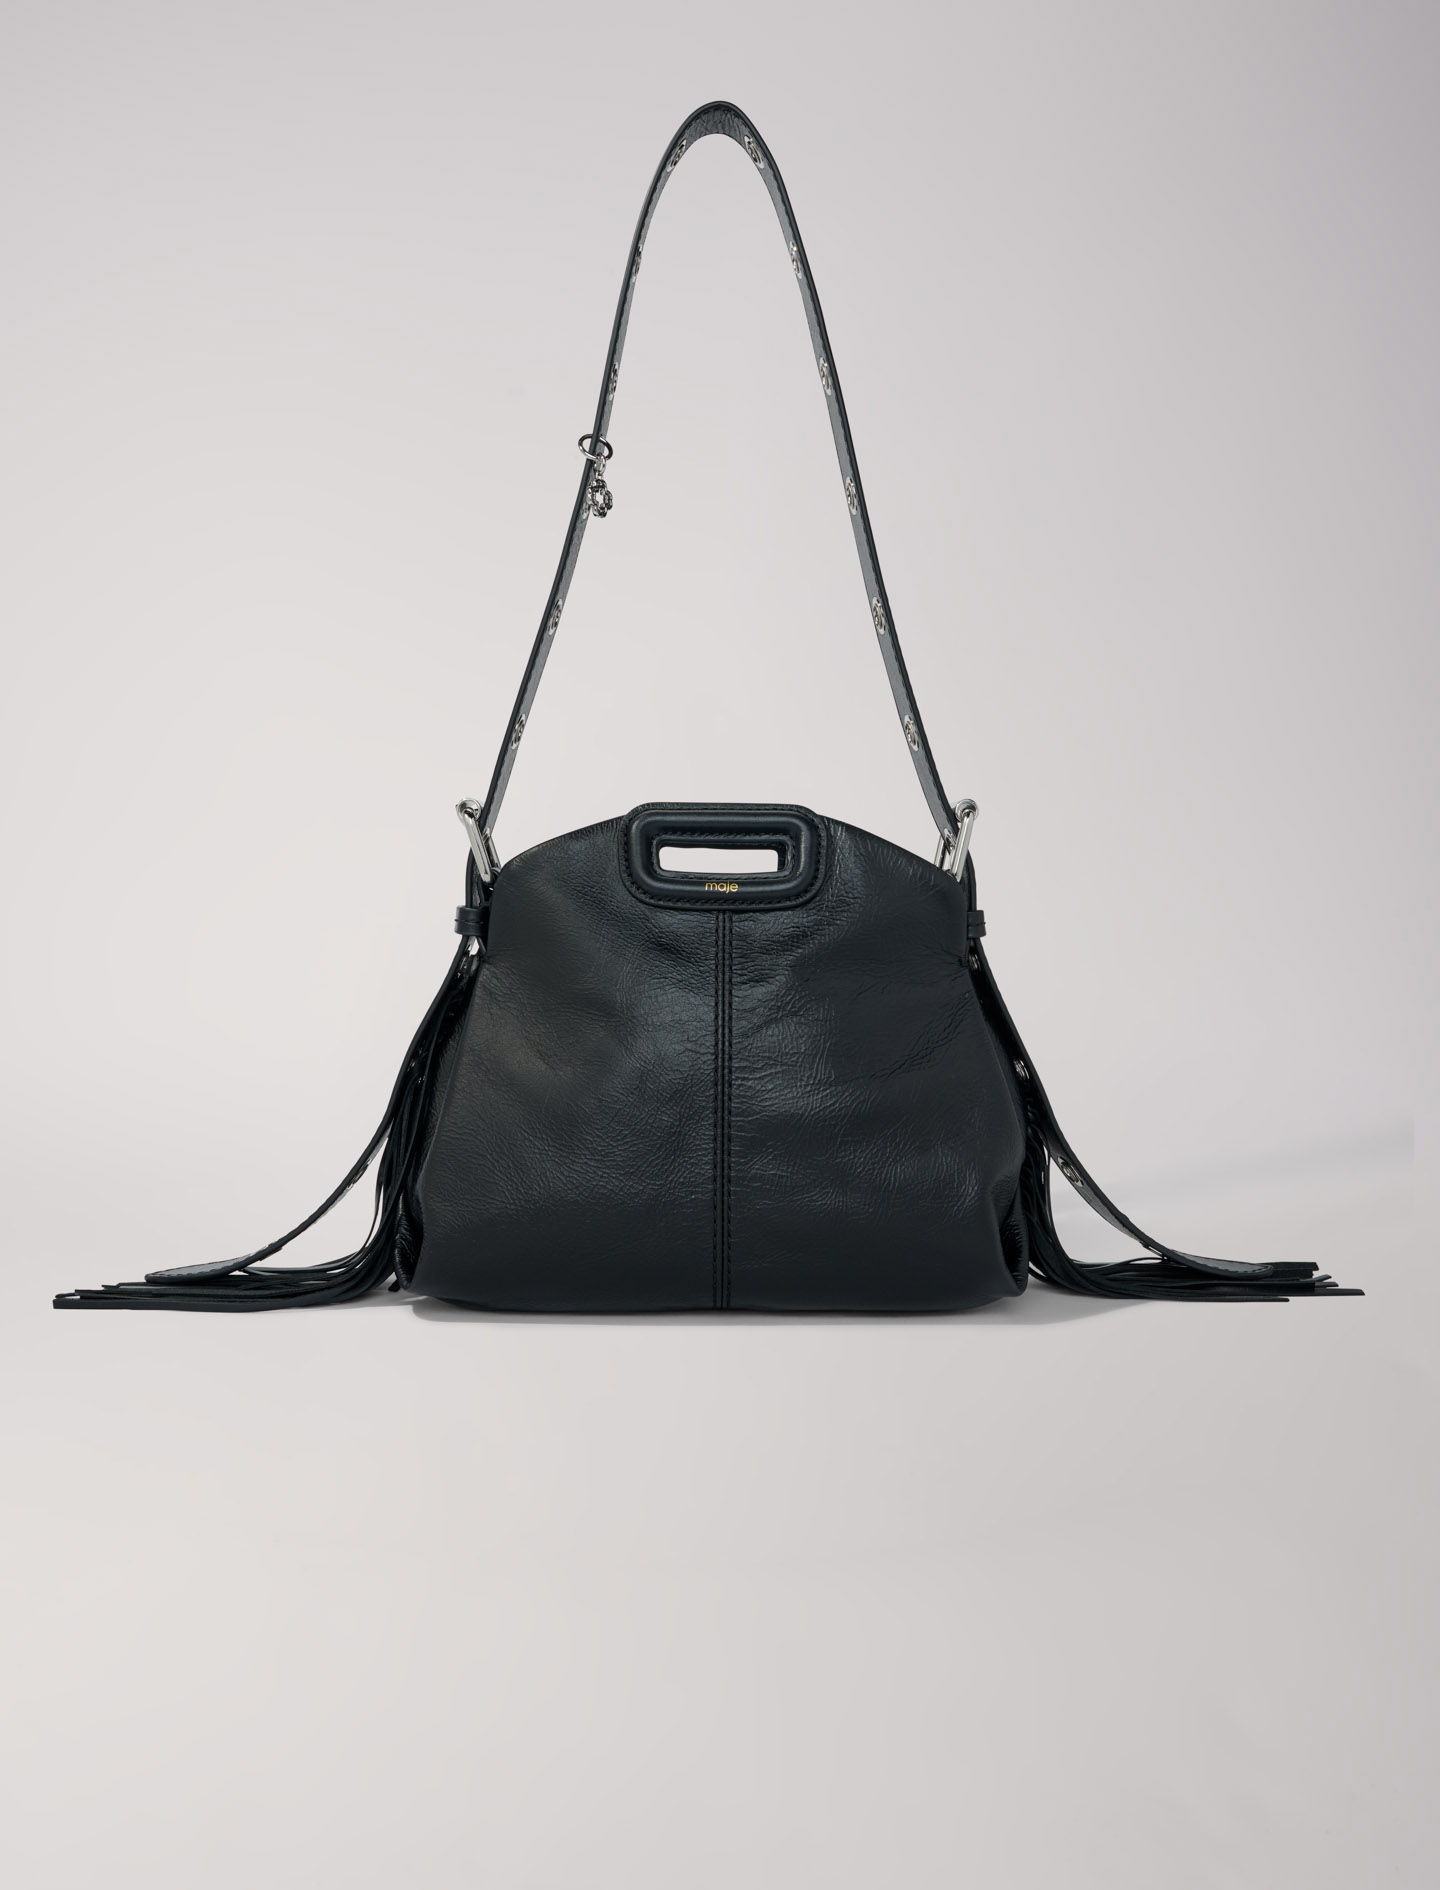 Mixte's polyester Leather: Crackle leather mini Miss M bag for Spring/Summer, size Mixte-All Bags-OS (ONE SIZE), in color Black / Black